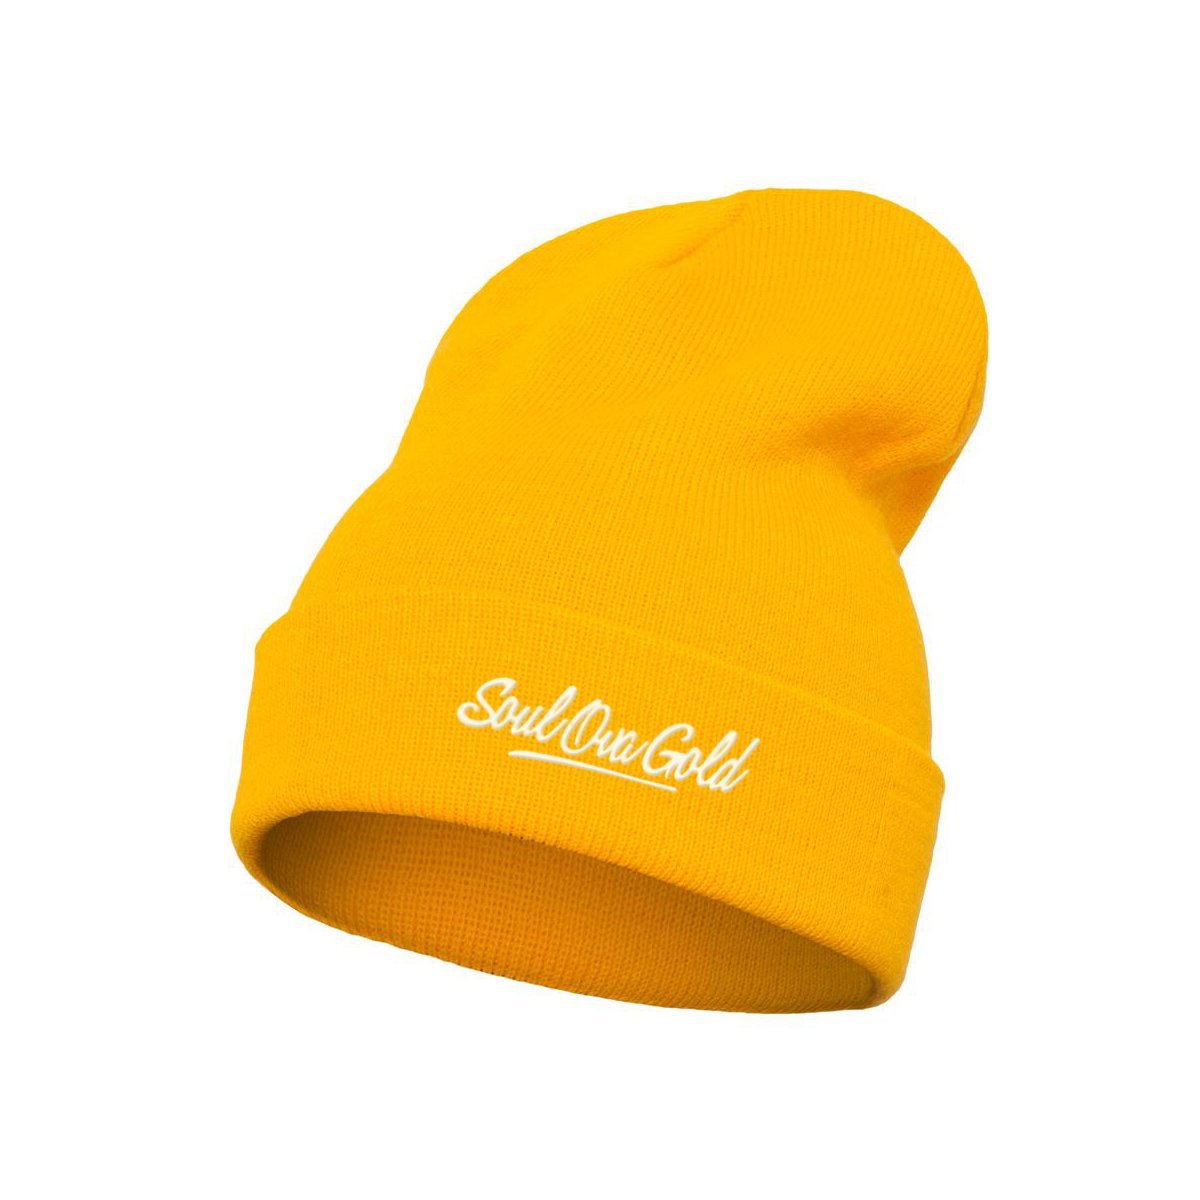 Soul Ova Gold Beanies Stick To The Script Embroidered Beanie (Gold)